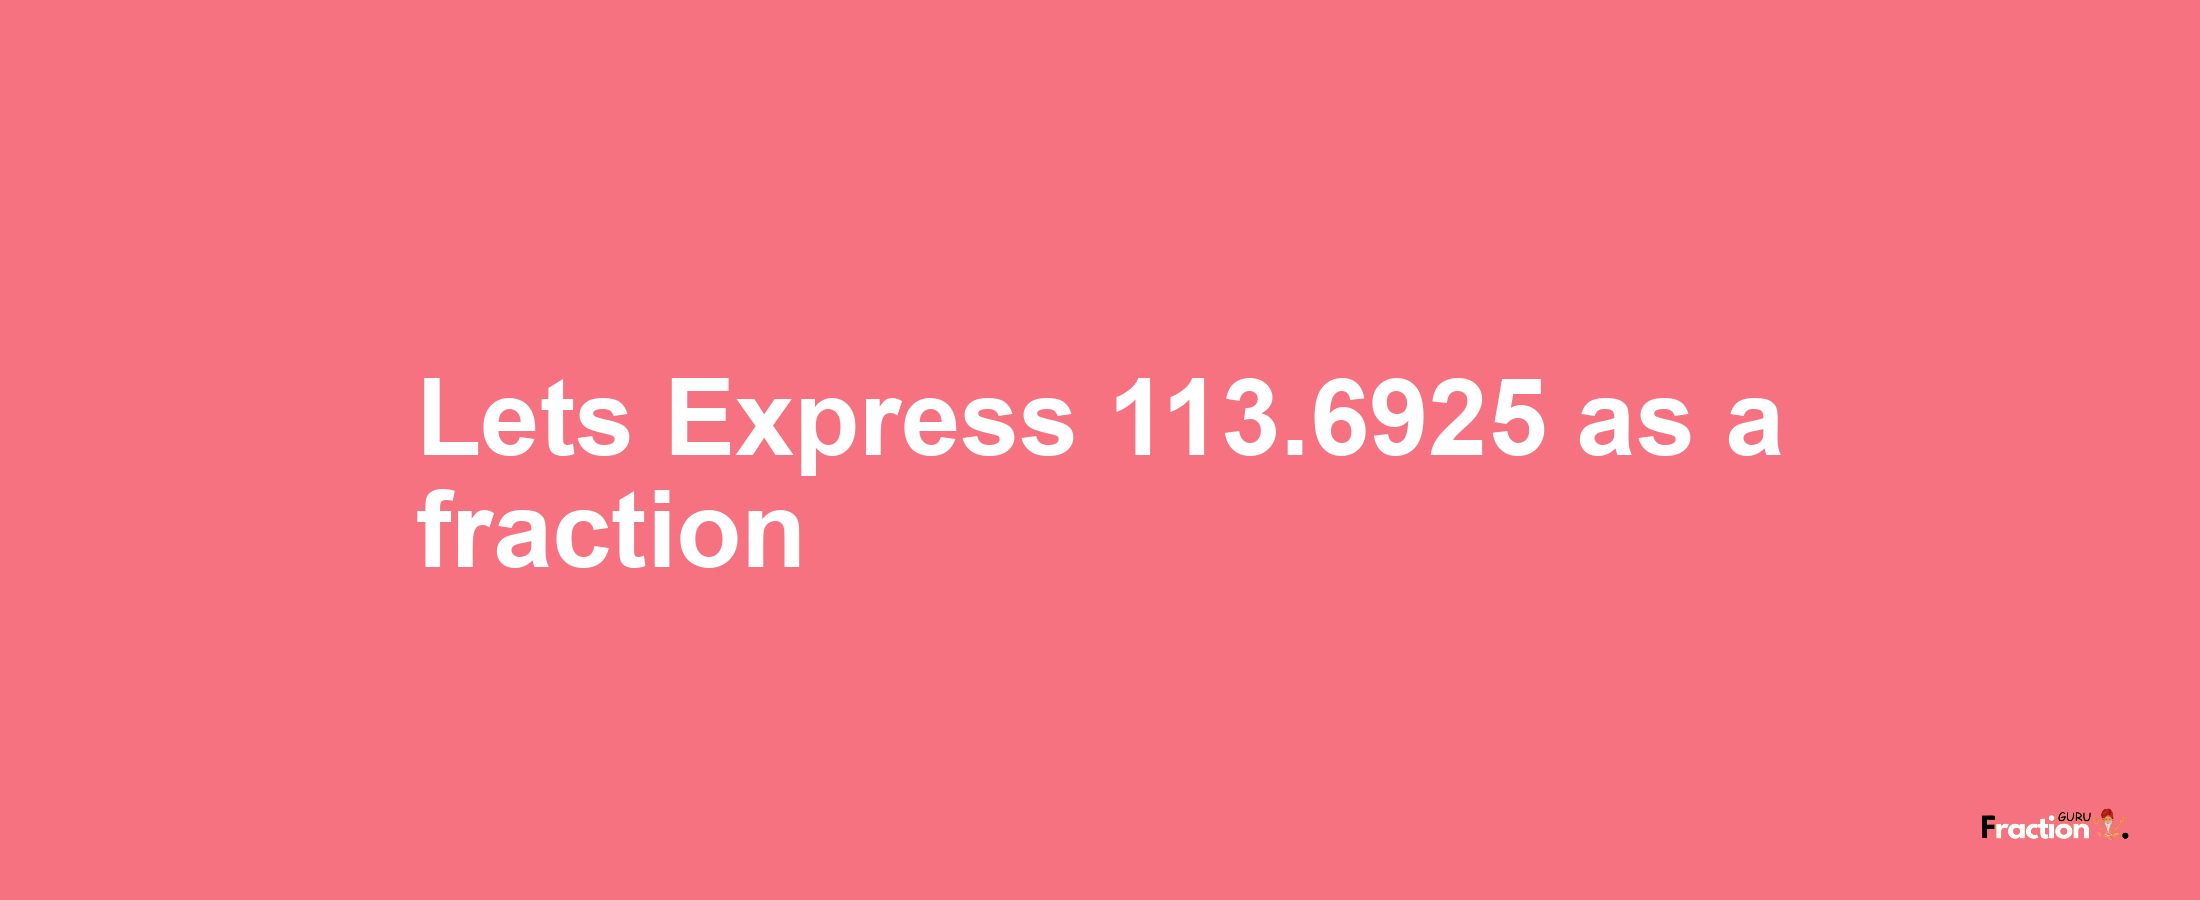 Lets Express 113.6925 as afraction